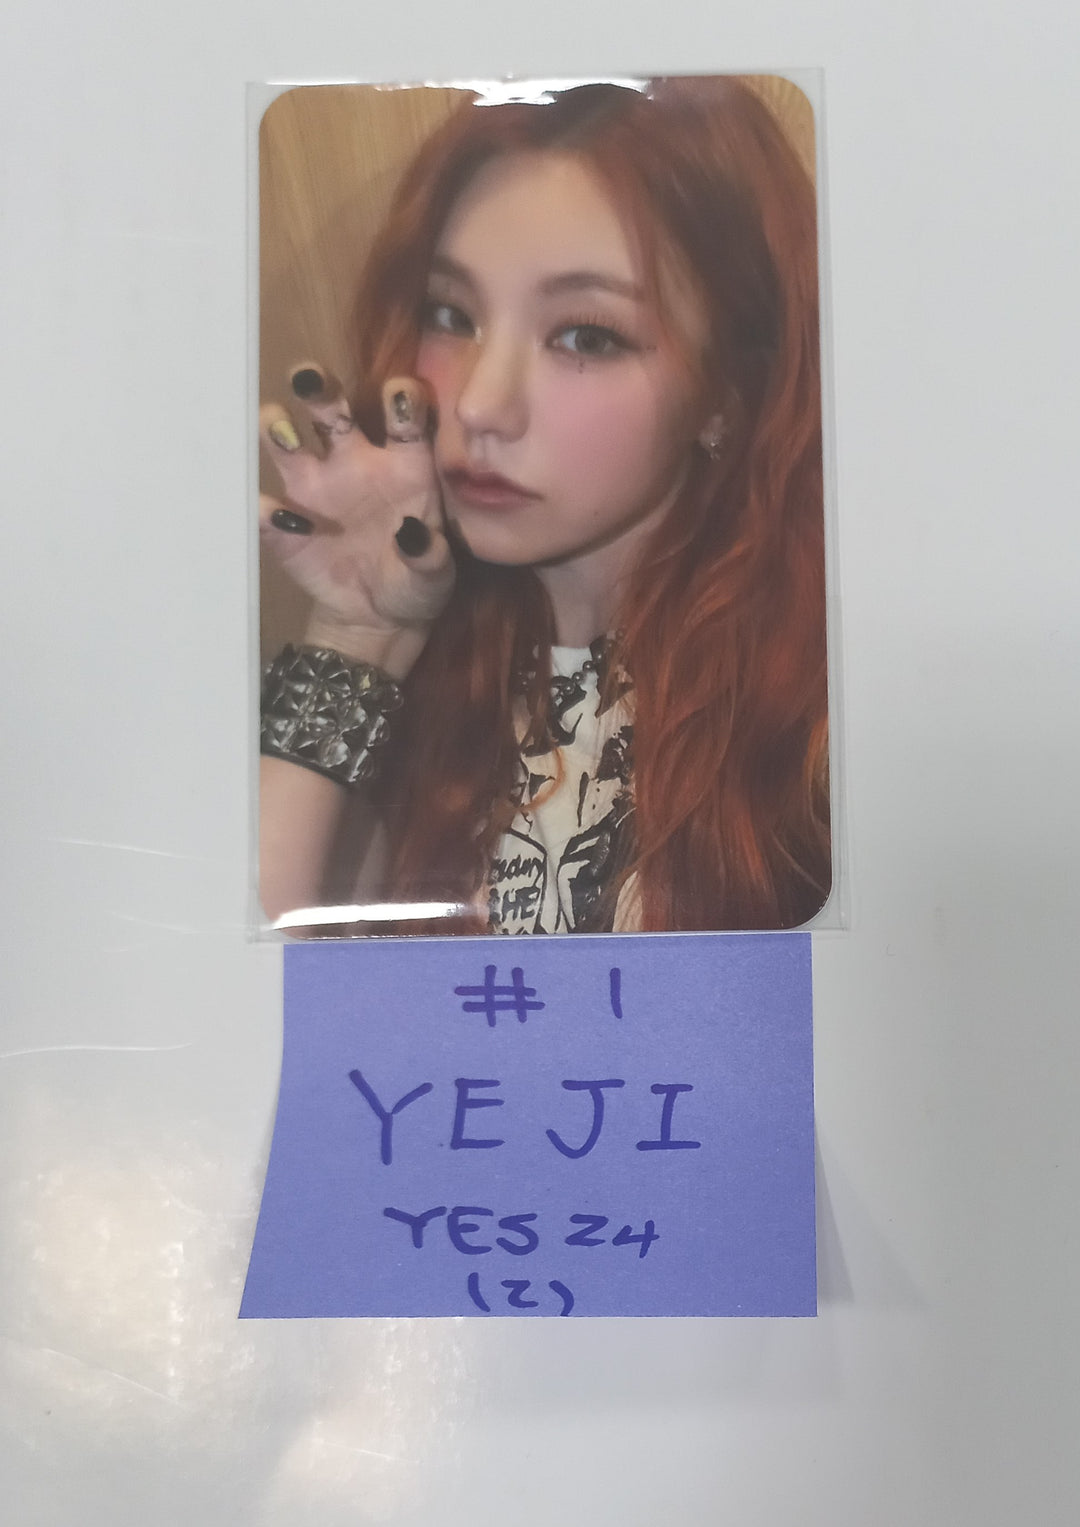 ITZY "BORN TO BE" - Yes24 Pre-Order Benefit Photocard [24.1.12]